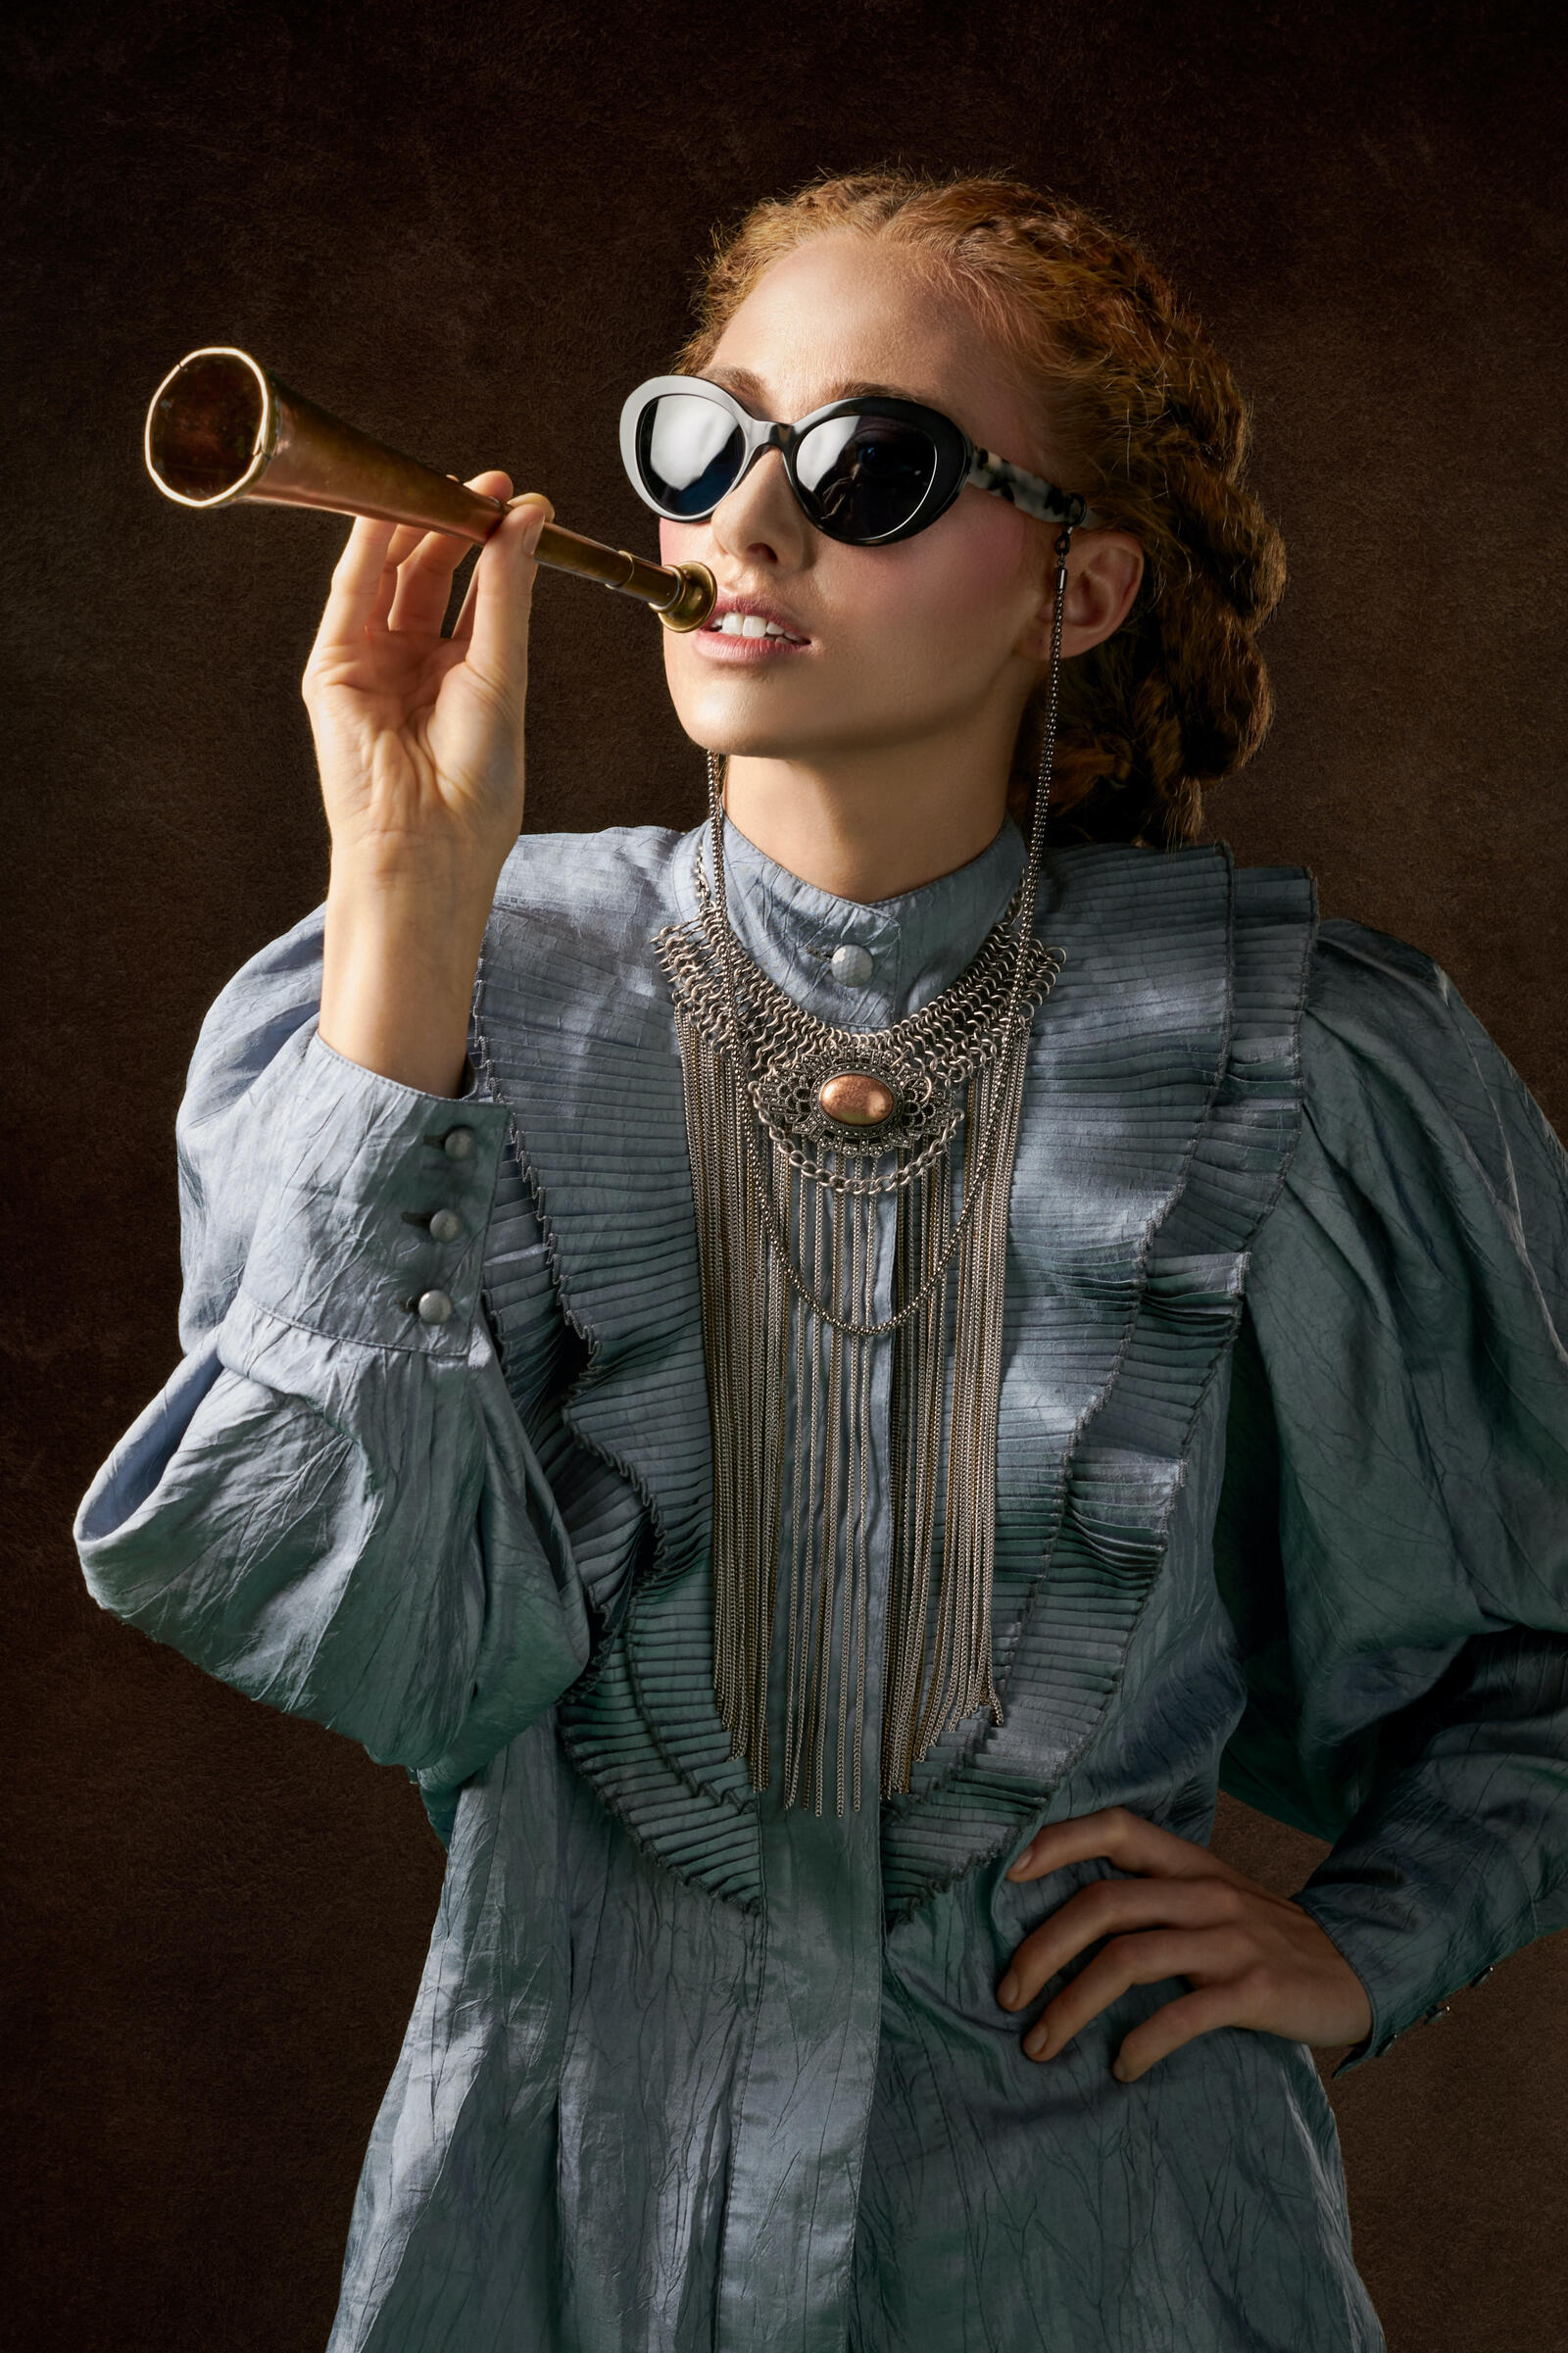 Free photo Picture of a girl in a steampunk style